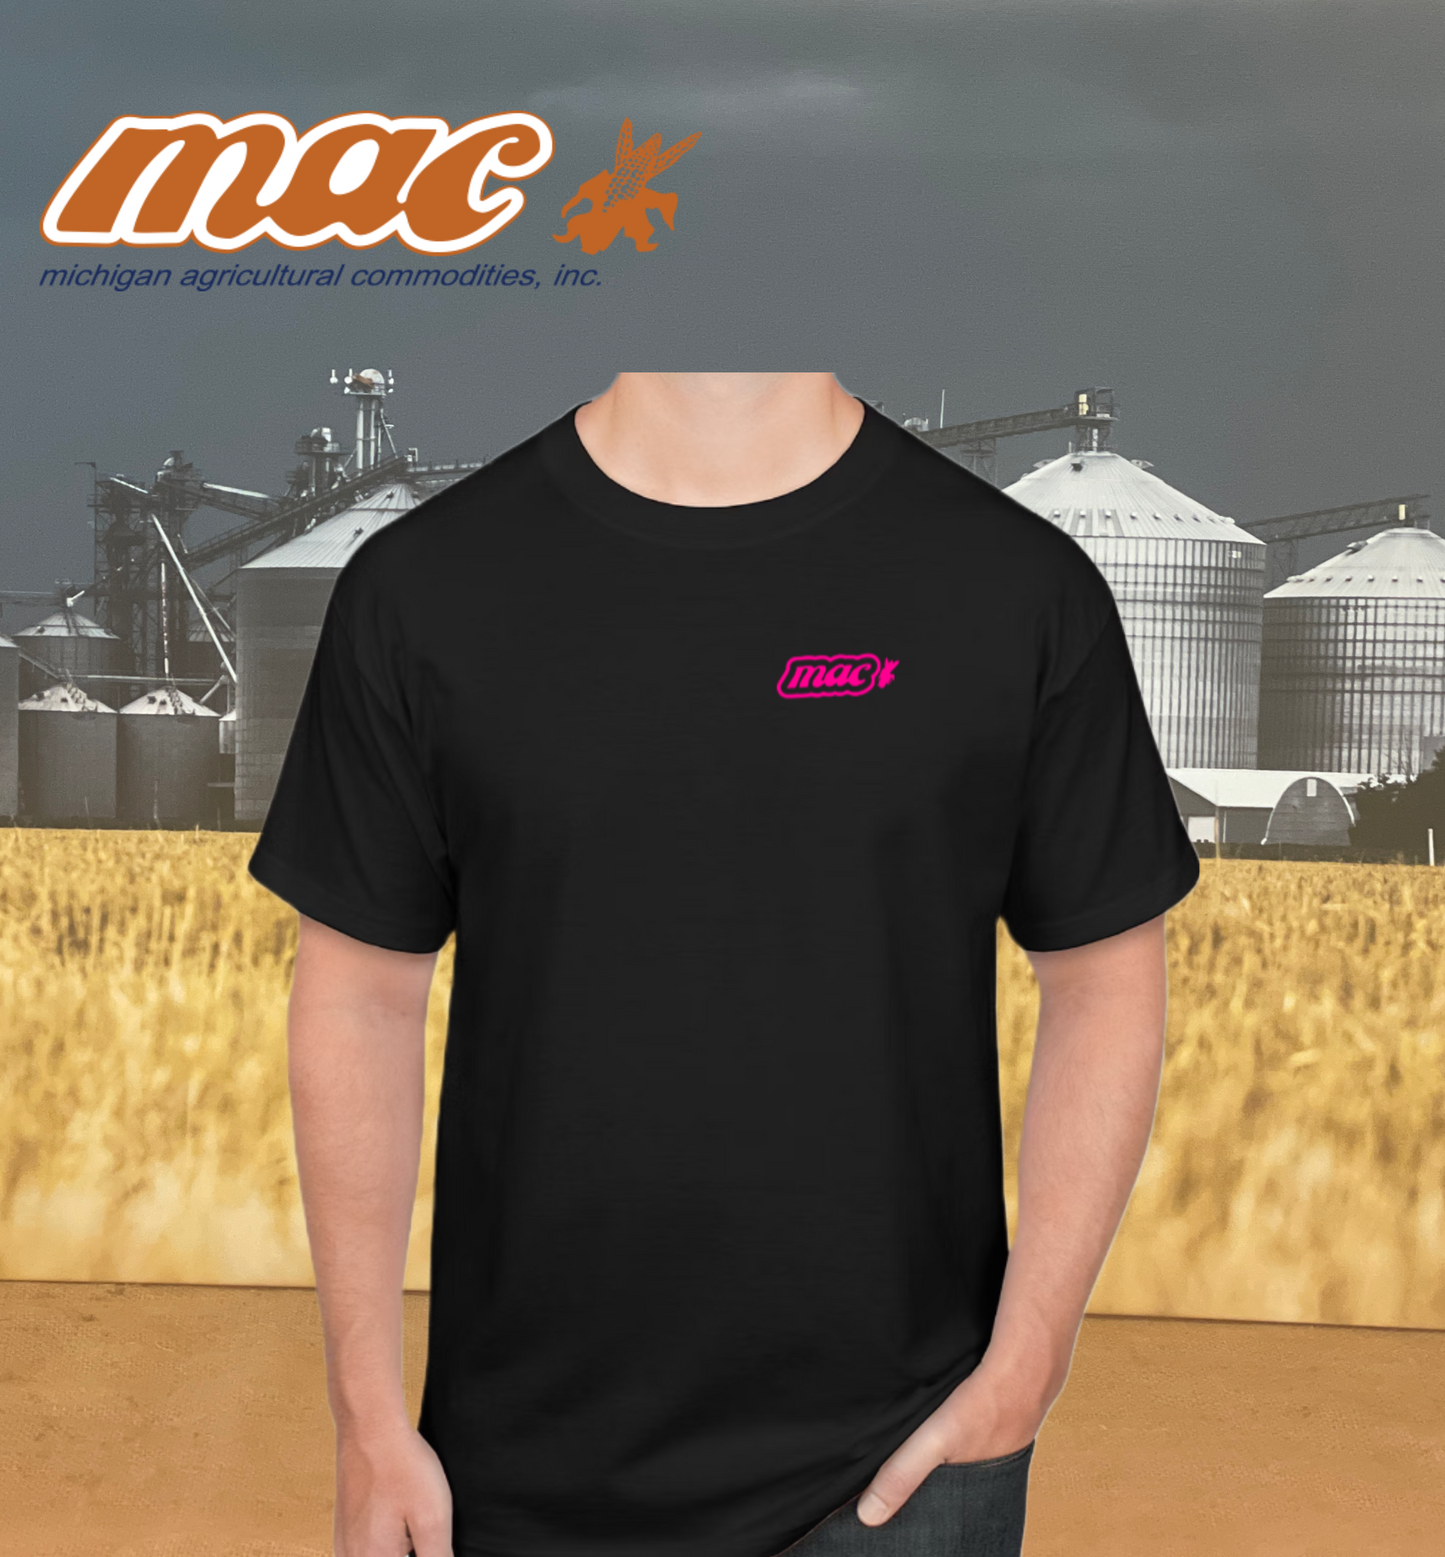 M.A.C. Support Your Local Farmers T-Shirt - Black & Hot Pink